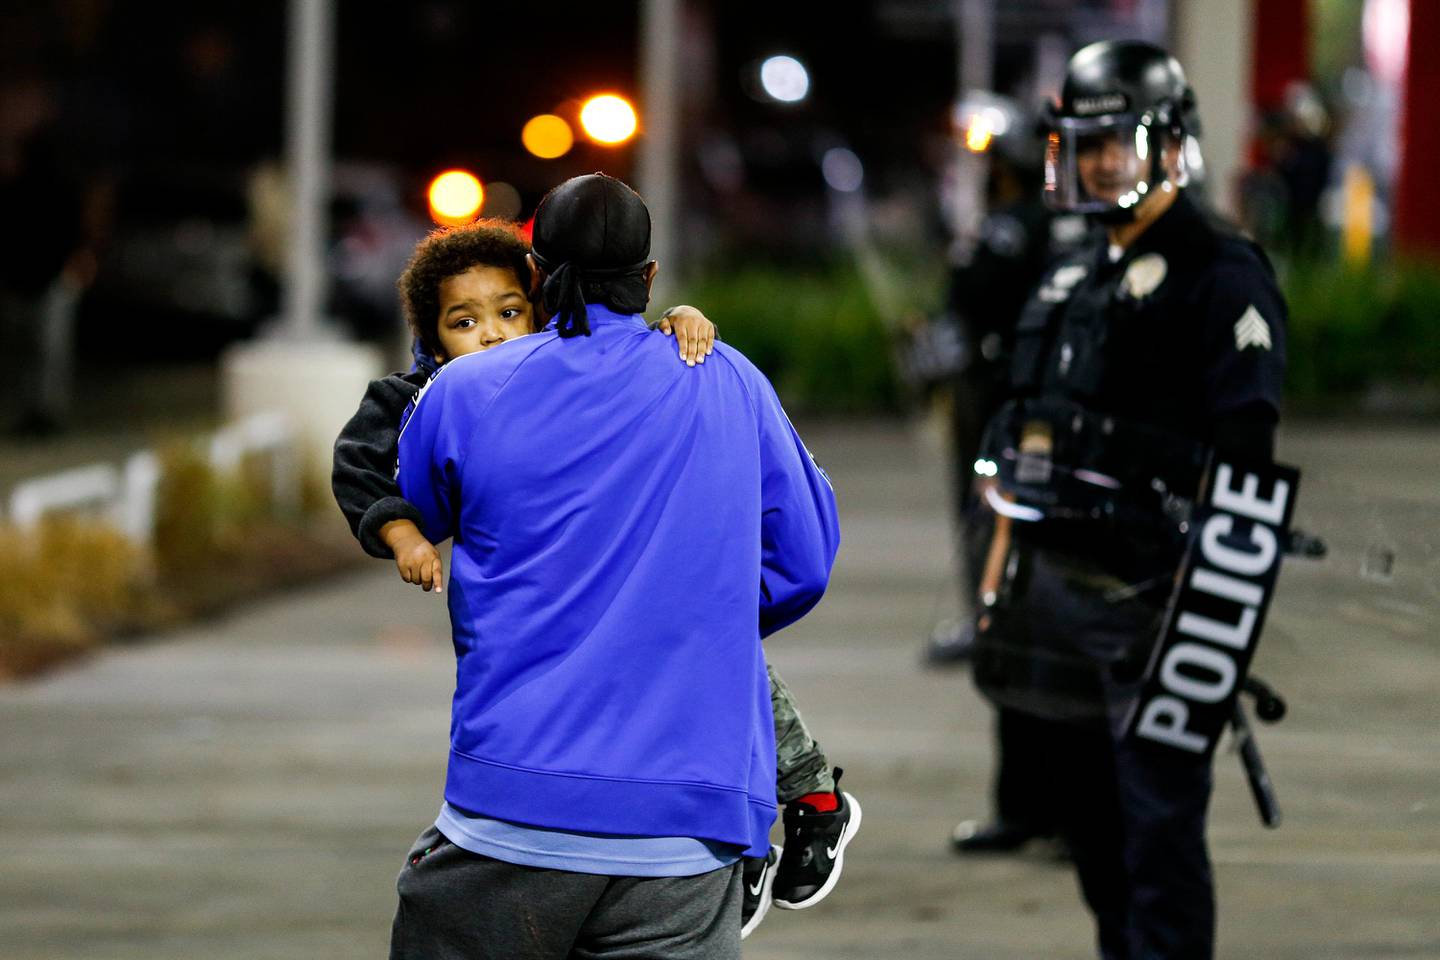 A man holding a child walks by police officers during a protest on election night, Tuesday, Nov. 3, 2020, in Los Angeles. (AP Photo/Ringo H.W. Chiu)